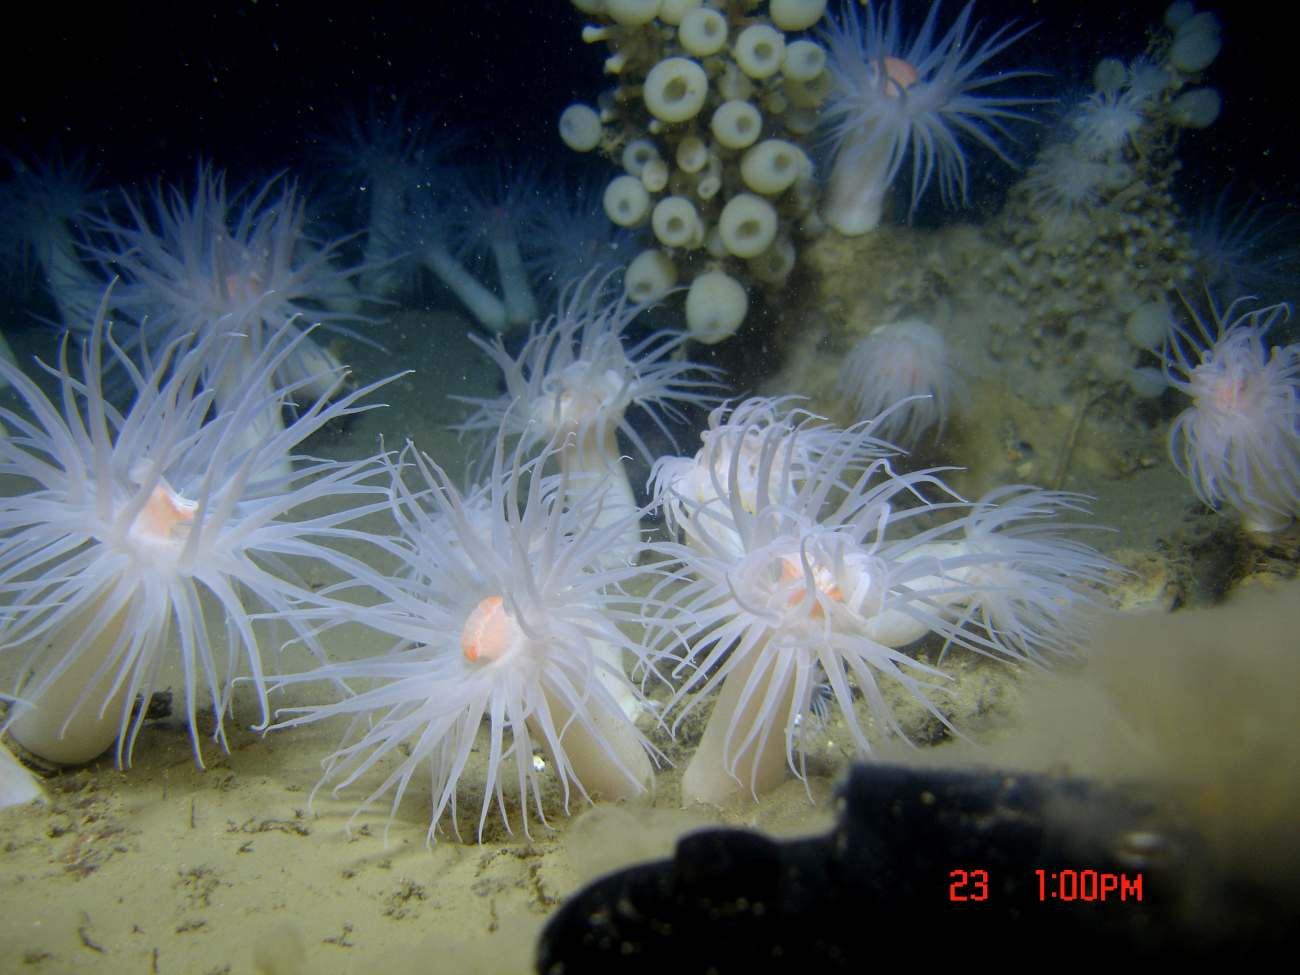 Large white anemones with orange mouths and a stand of lollipop stalked sponges